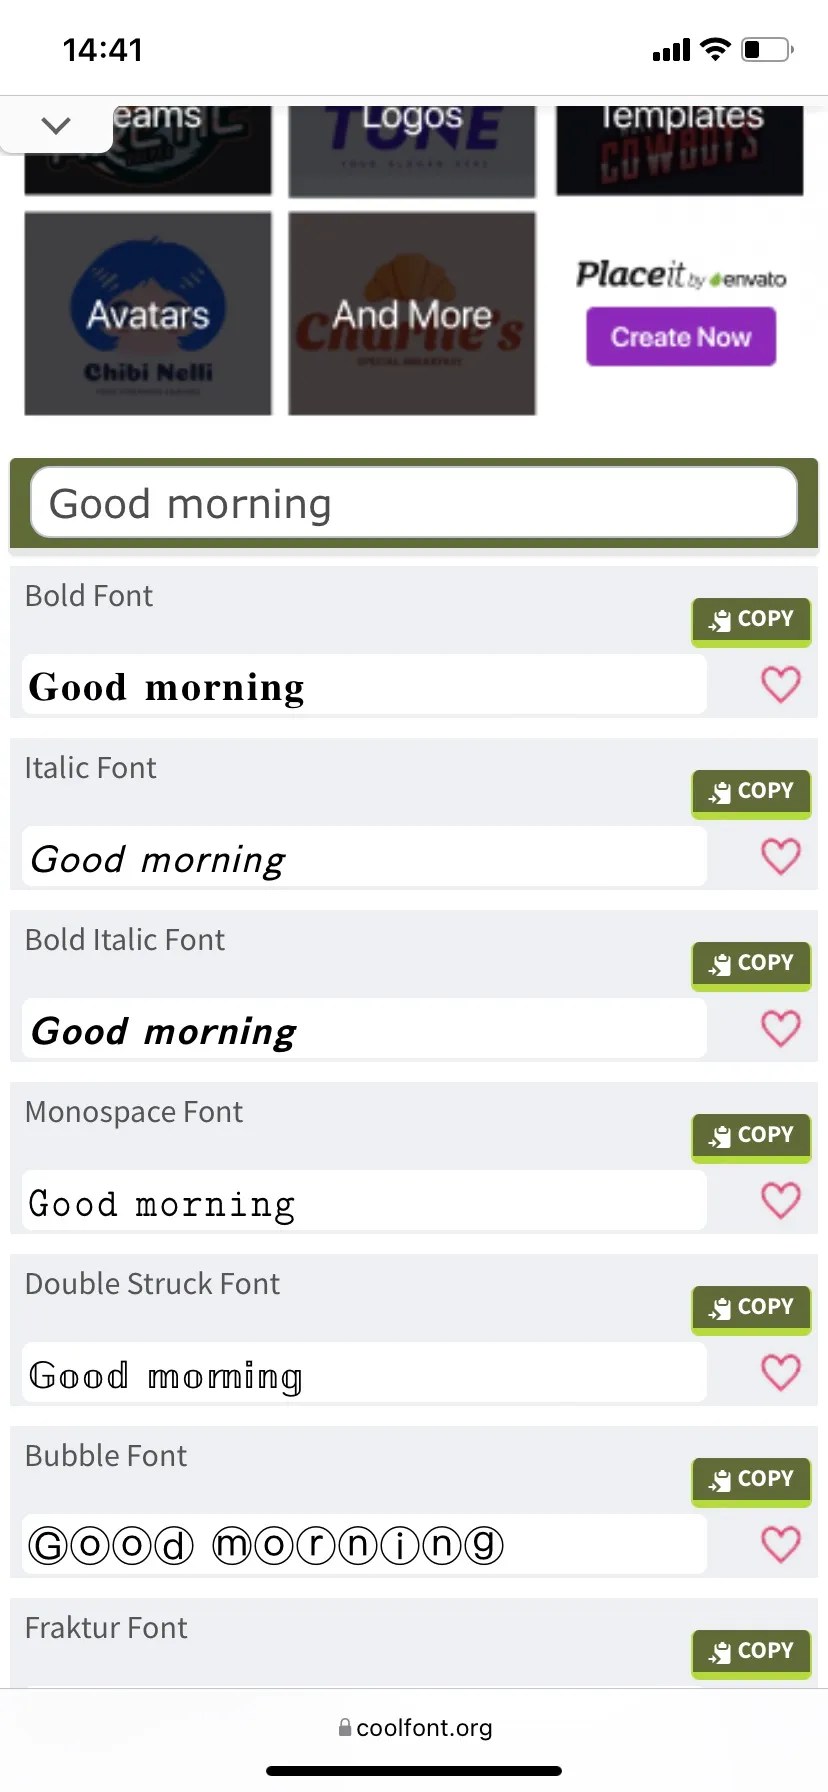 Changing text font on CoolFont.org